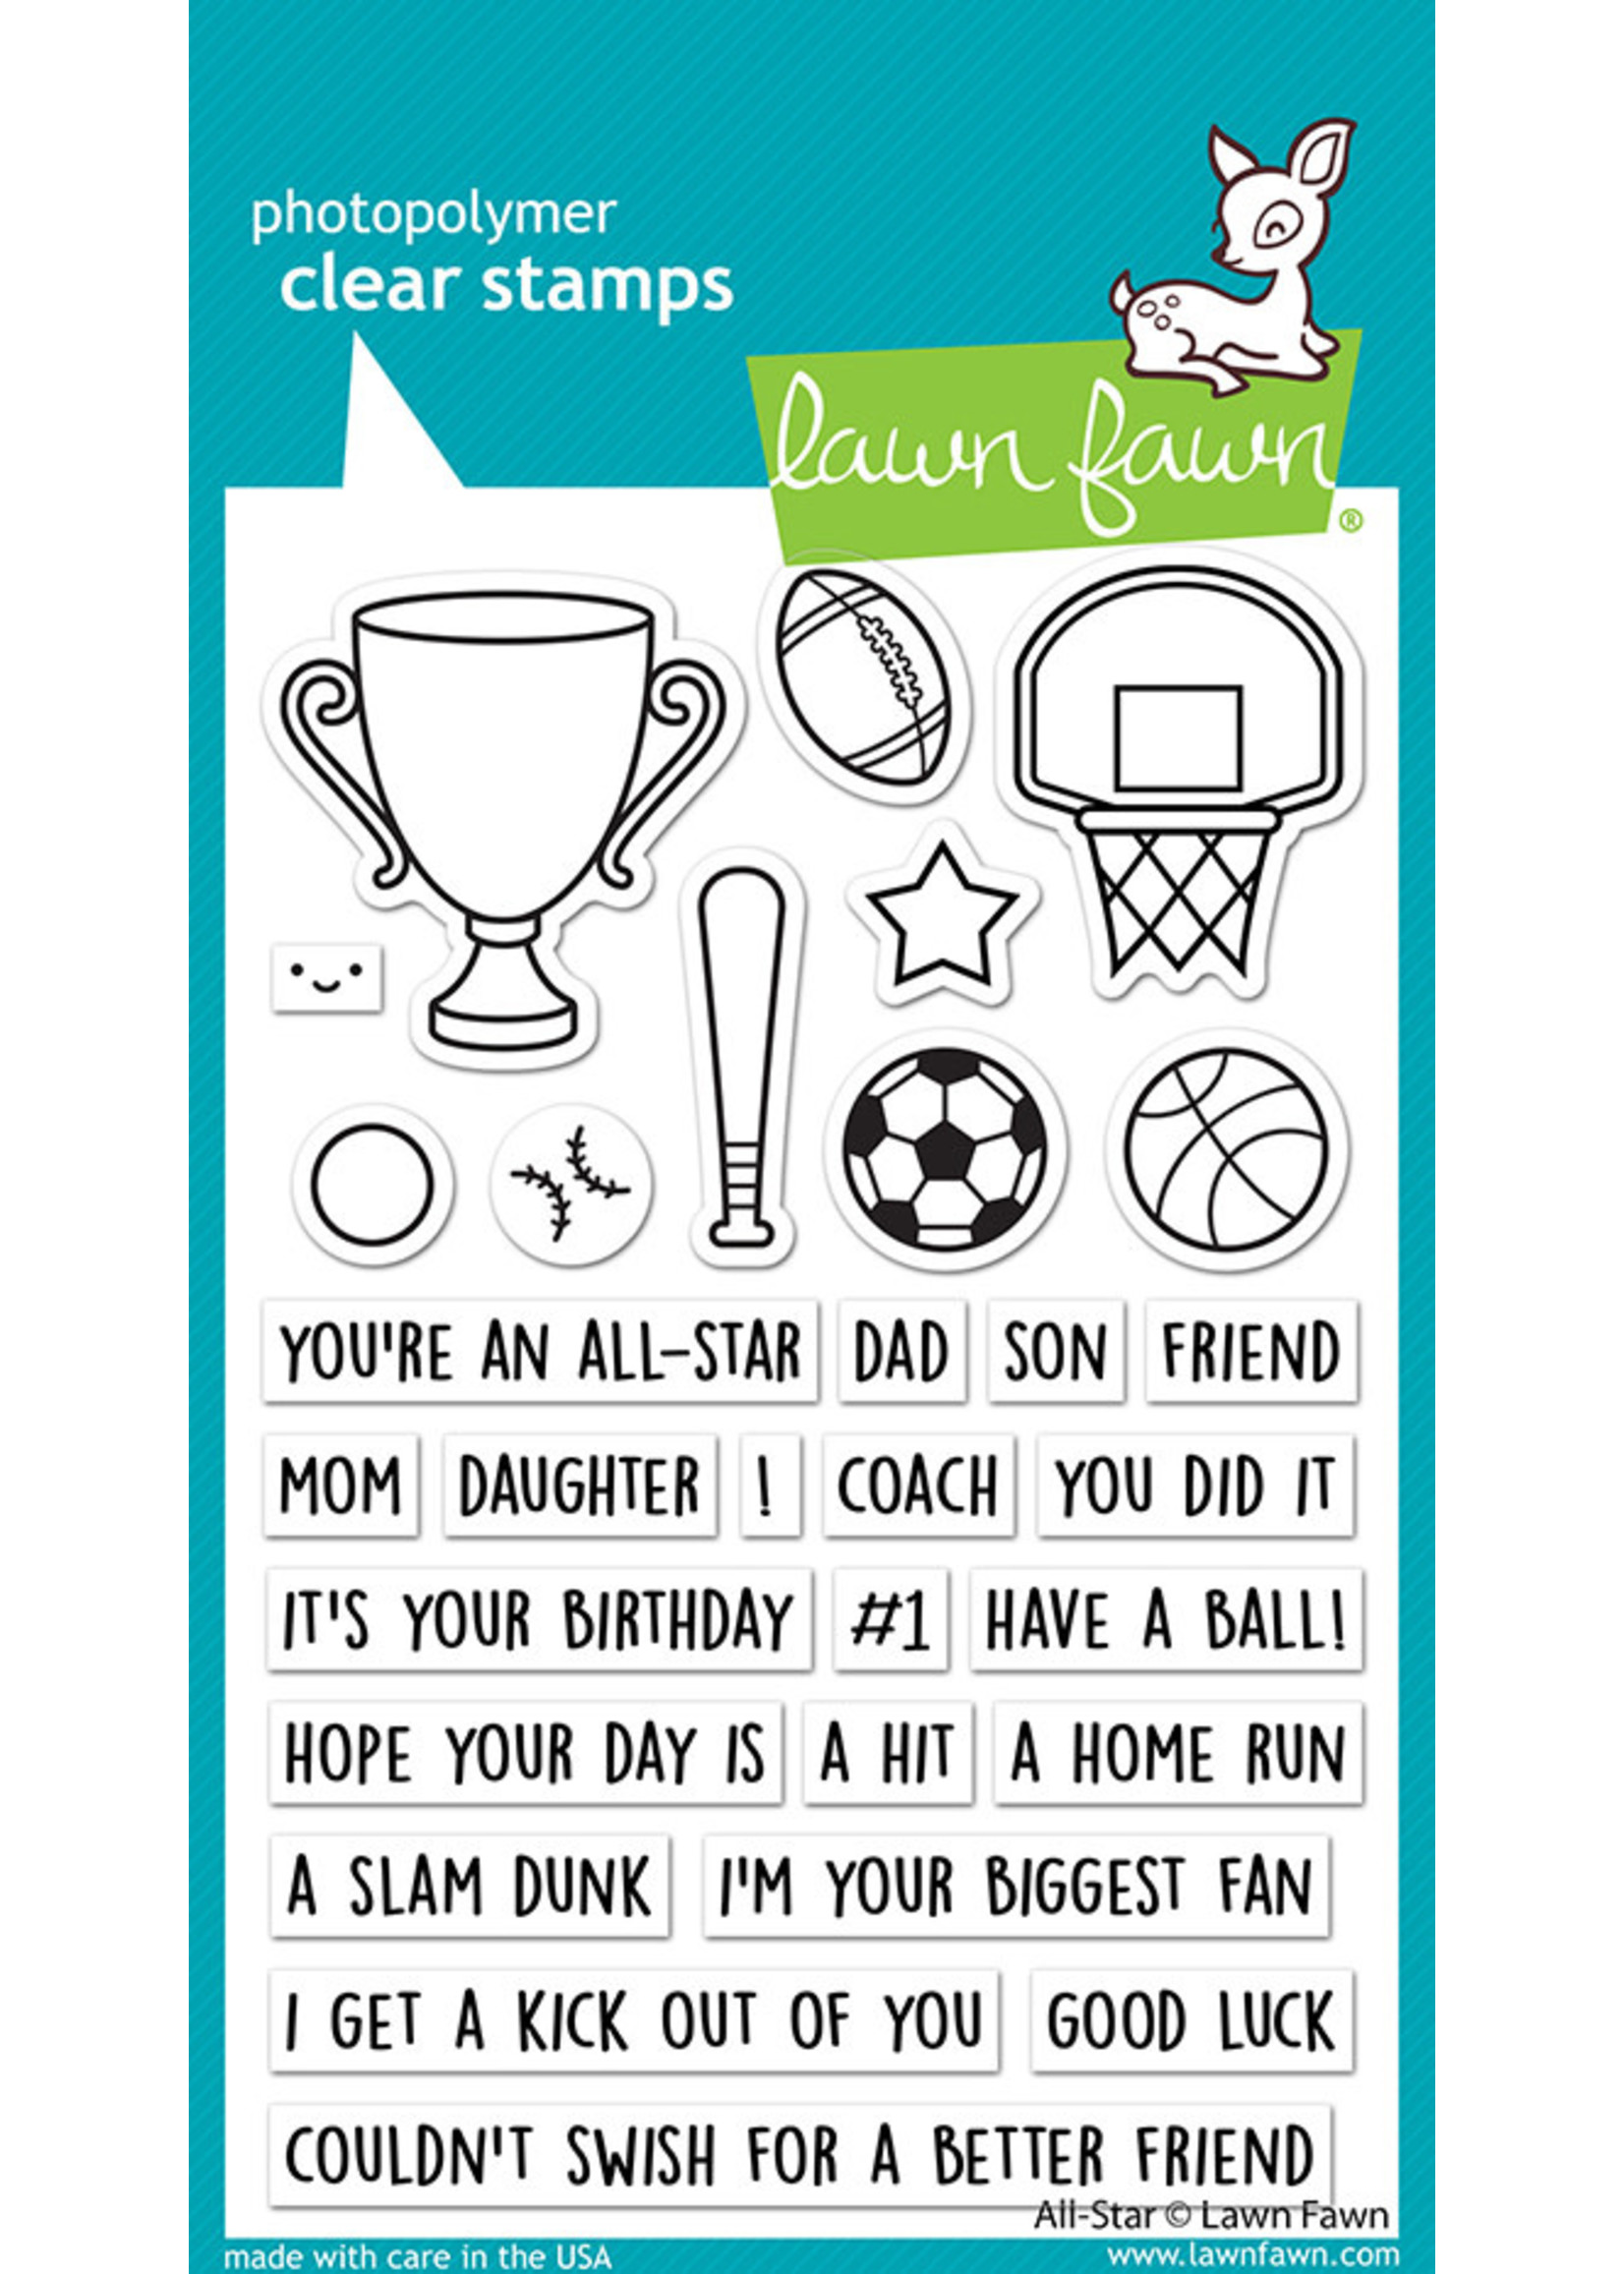 Lawn Fawn all-star stamp